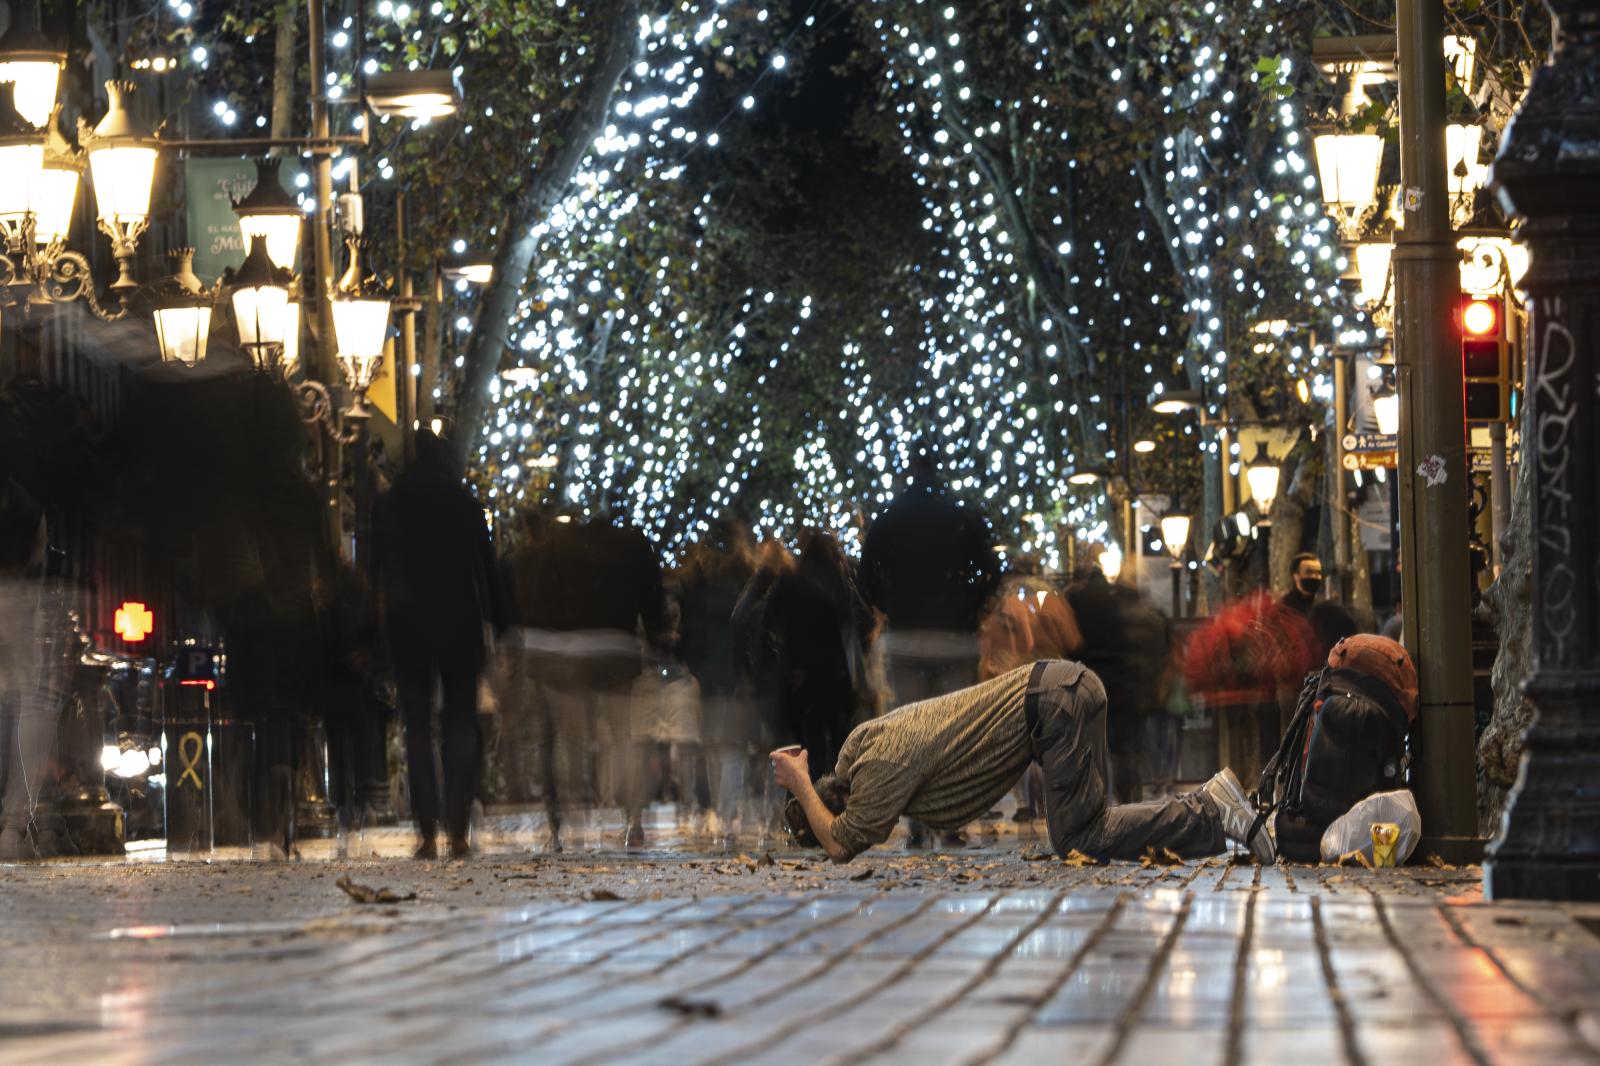 Image from DAILY NEWS - A homeless person begs for alms on the Ramblas of...